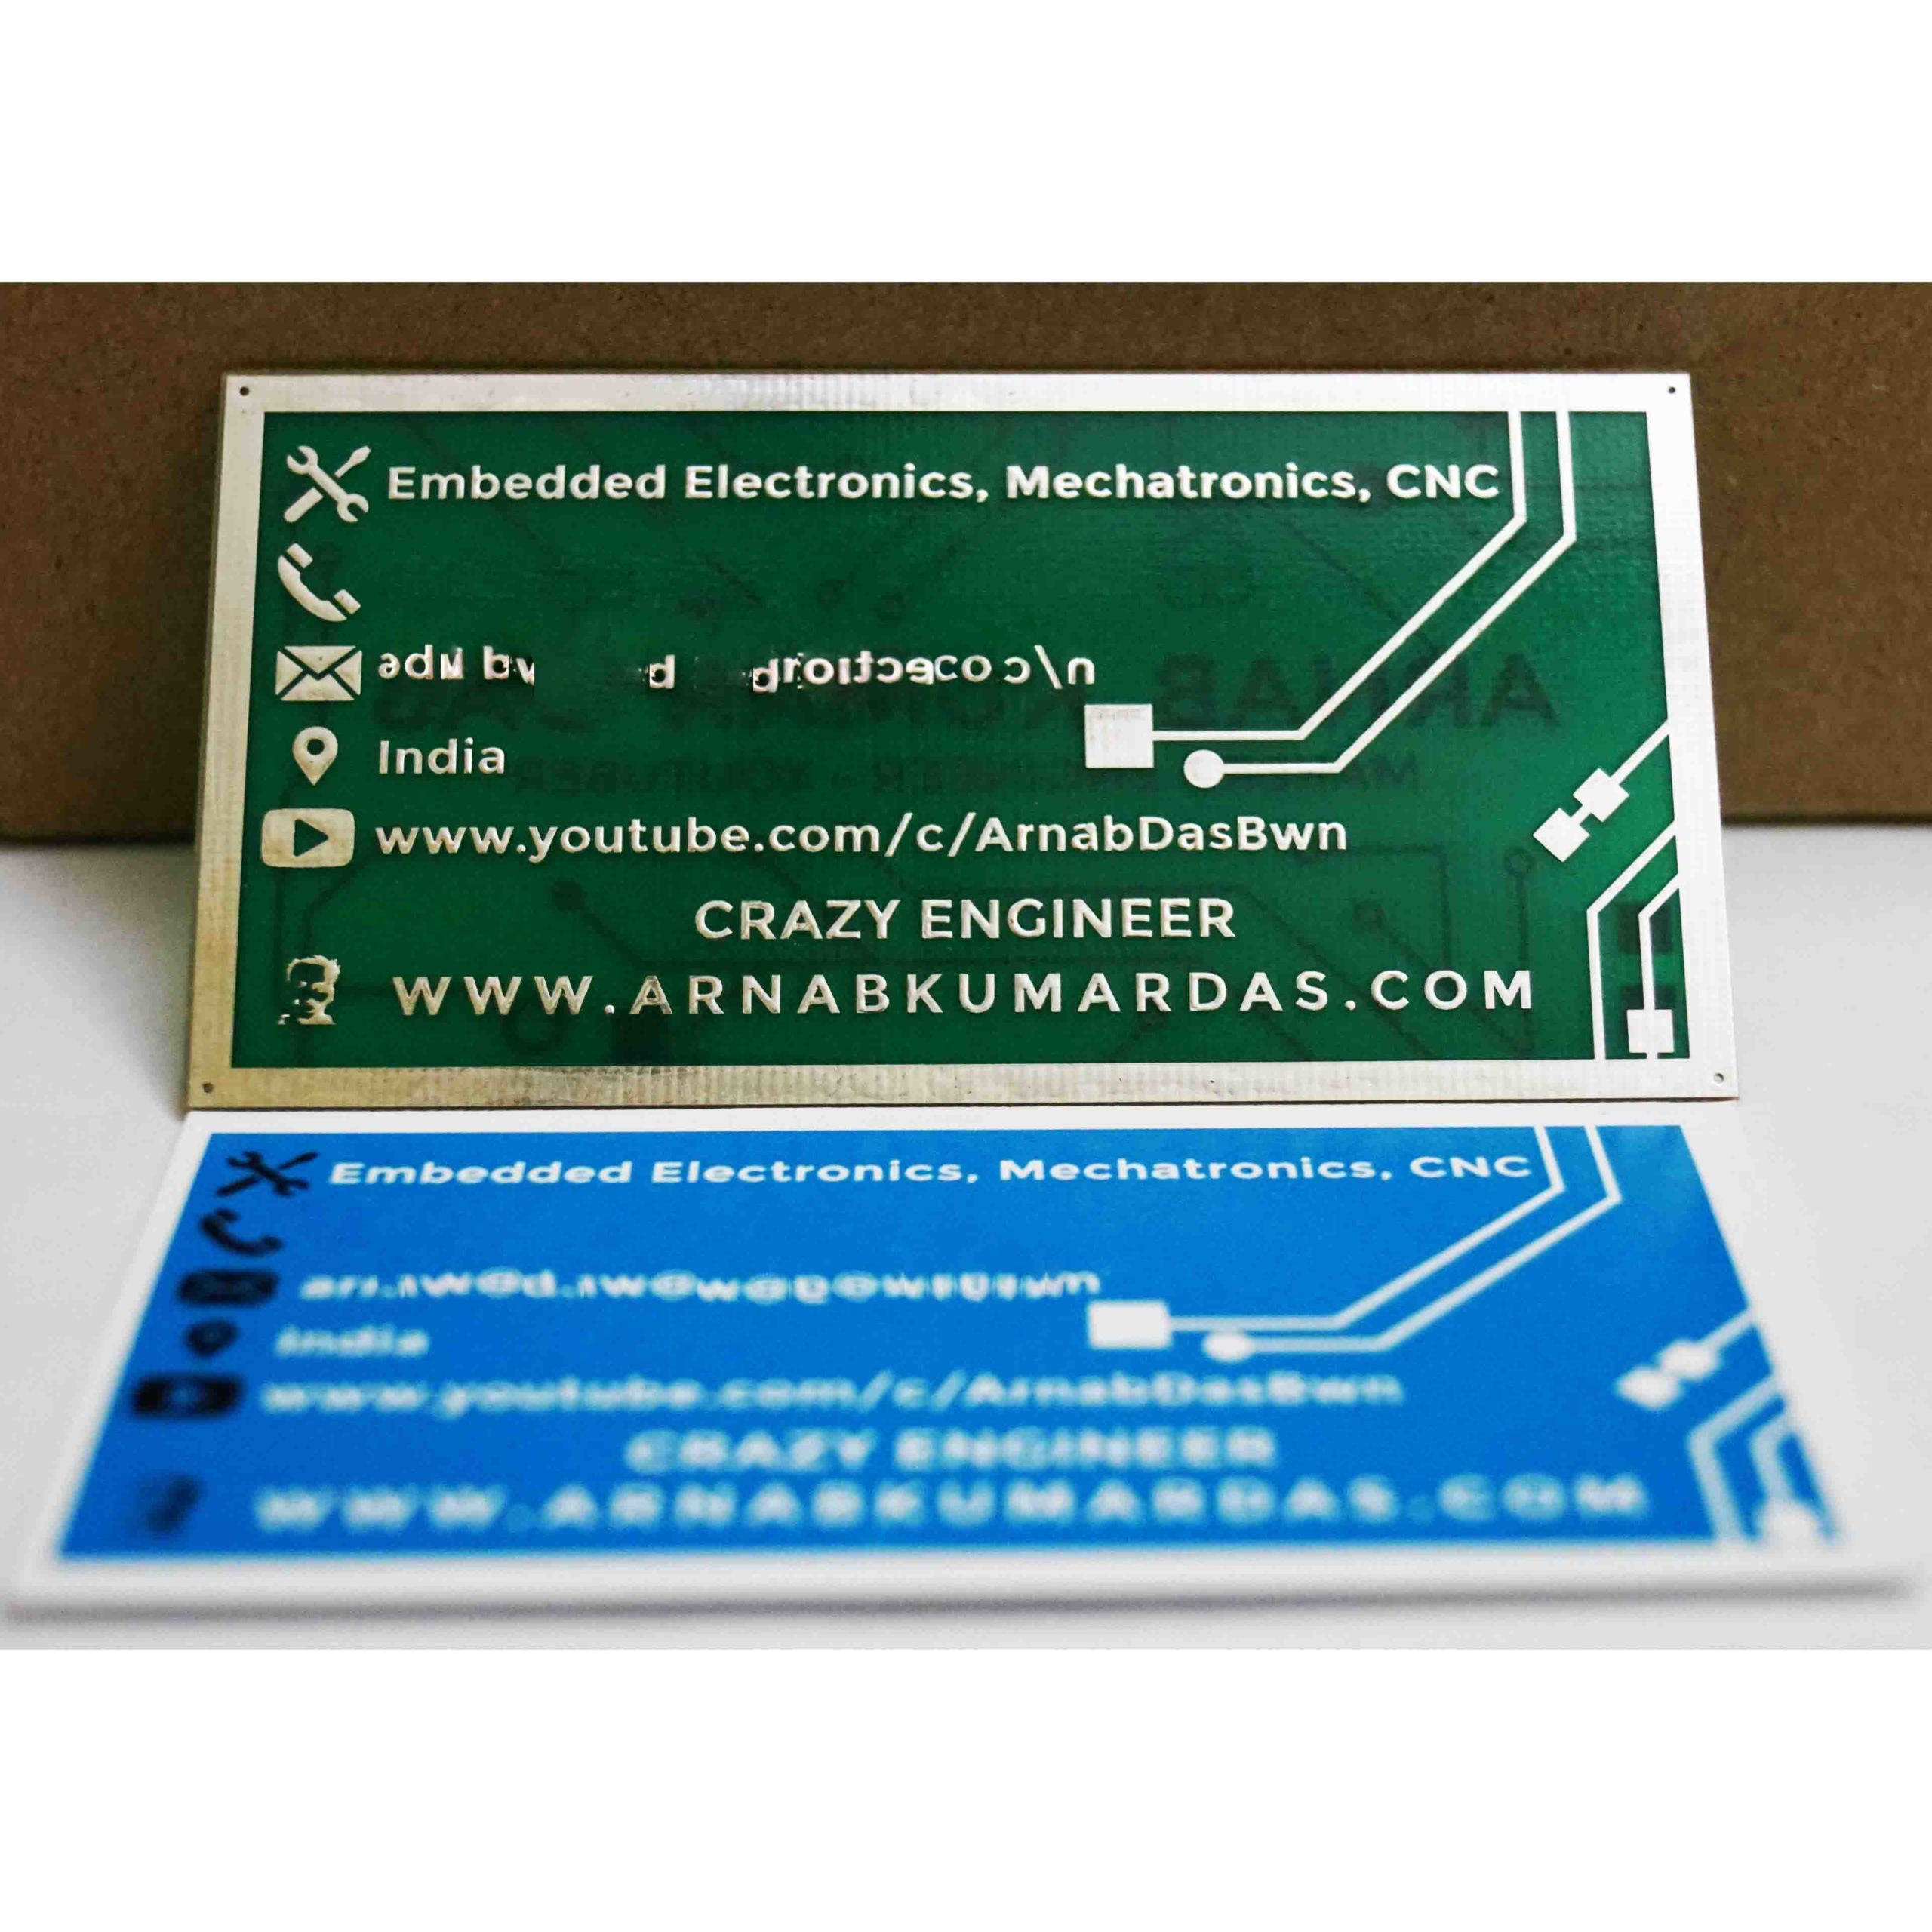 Crazy Engineer's PCB Business Card With the Paper Version